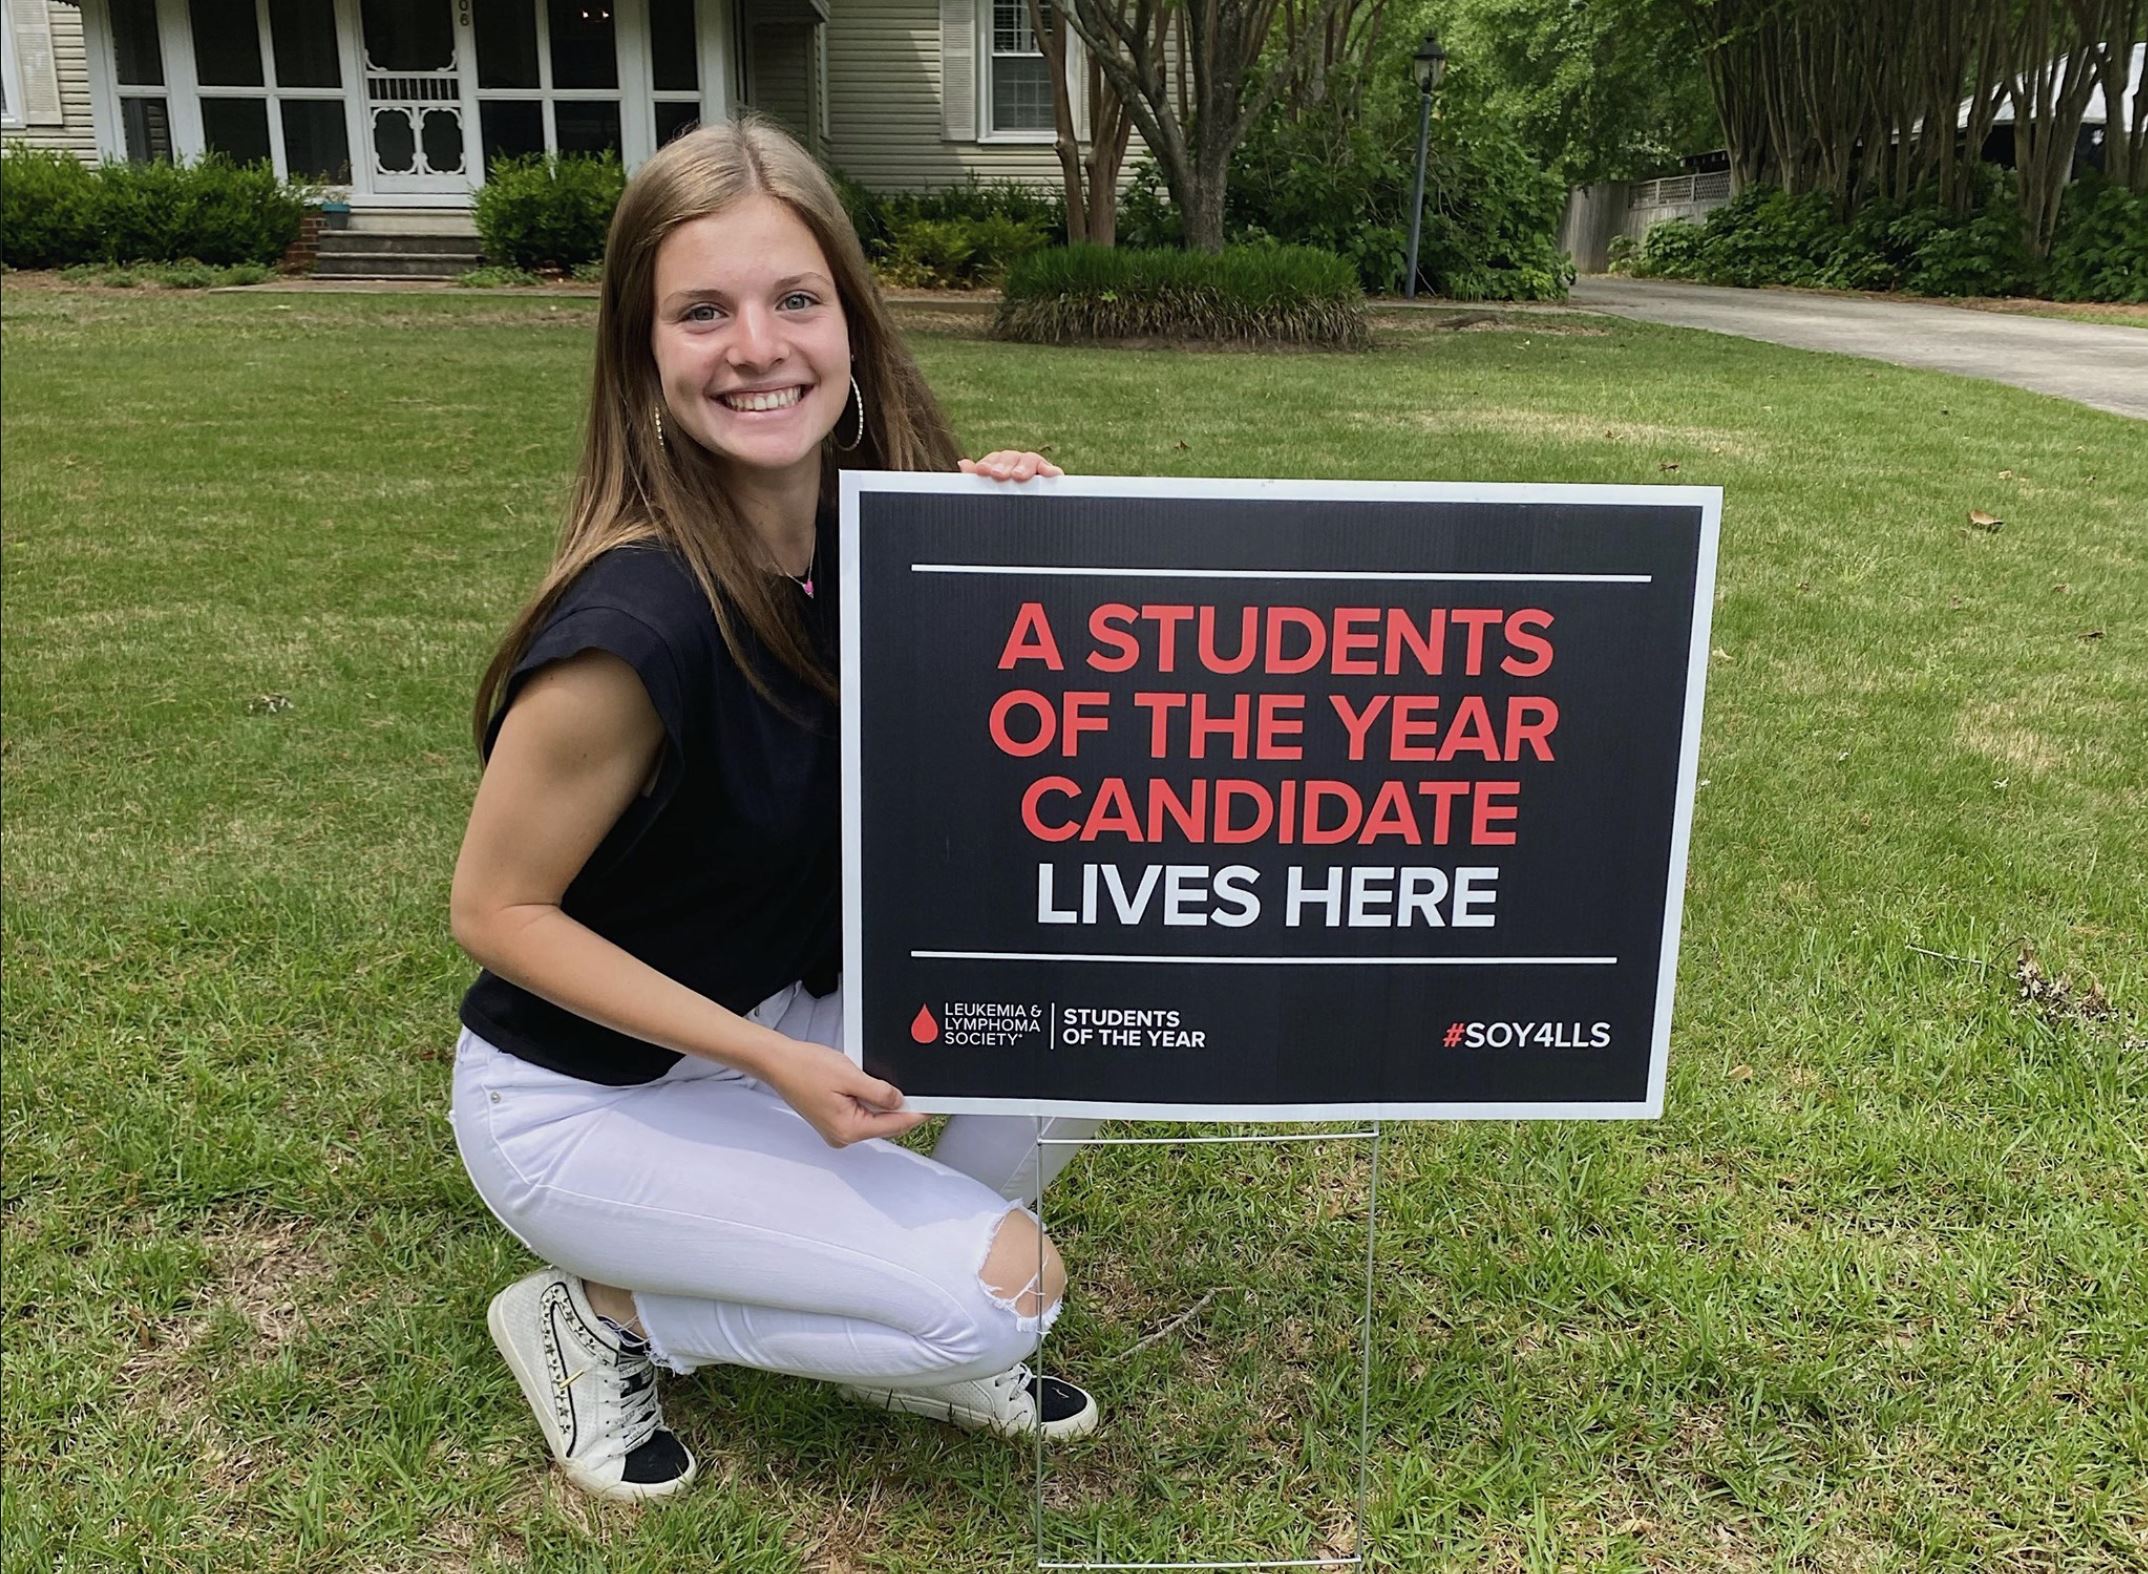 Trussville teen places runner-up in Student of the Year campaign